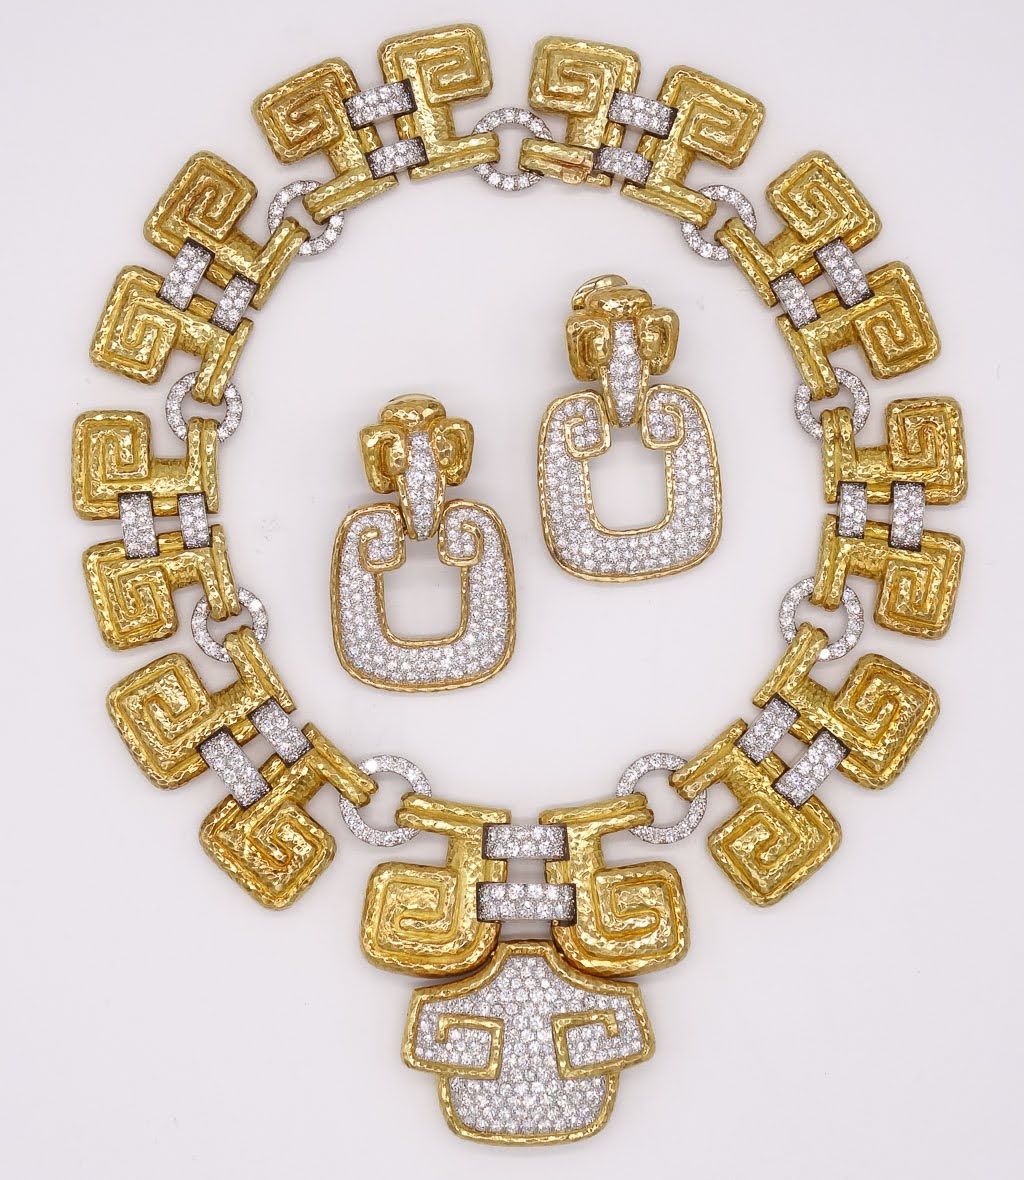 David Webb Ancient World Scroll Necklace and Earrings